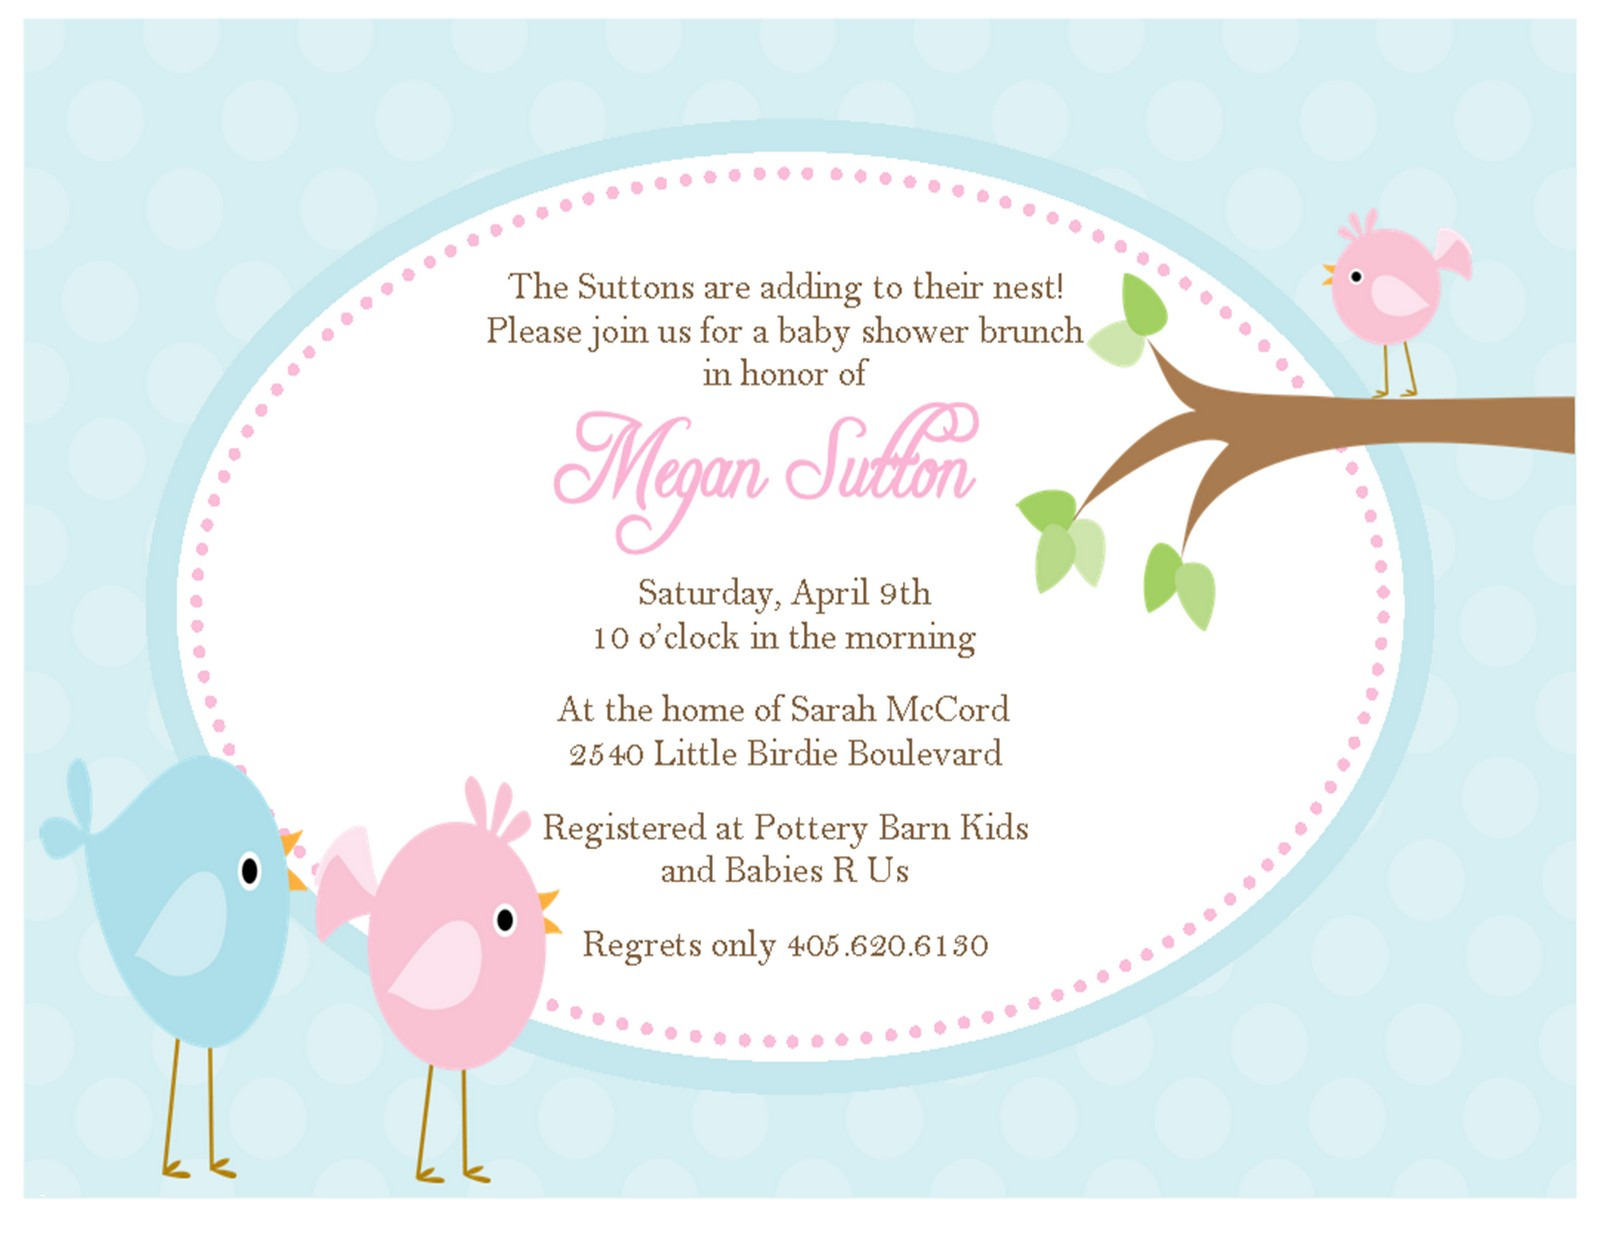 Full Size of Baby Shower:delightful Baby Shower Invitation Wording Picture Designs Baby Shower Invitation Wording Fun Baby Shower Games Baby Shower Photos Best Baby Shower Gifts 2018 Books For Baby Shower Baby Shower De Niño Baby Shower Sayings Baby Shower Wording For Cards Luxury Lovely Baby Shower Invitations Wording Ndash Laceandbuckles